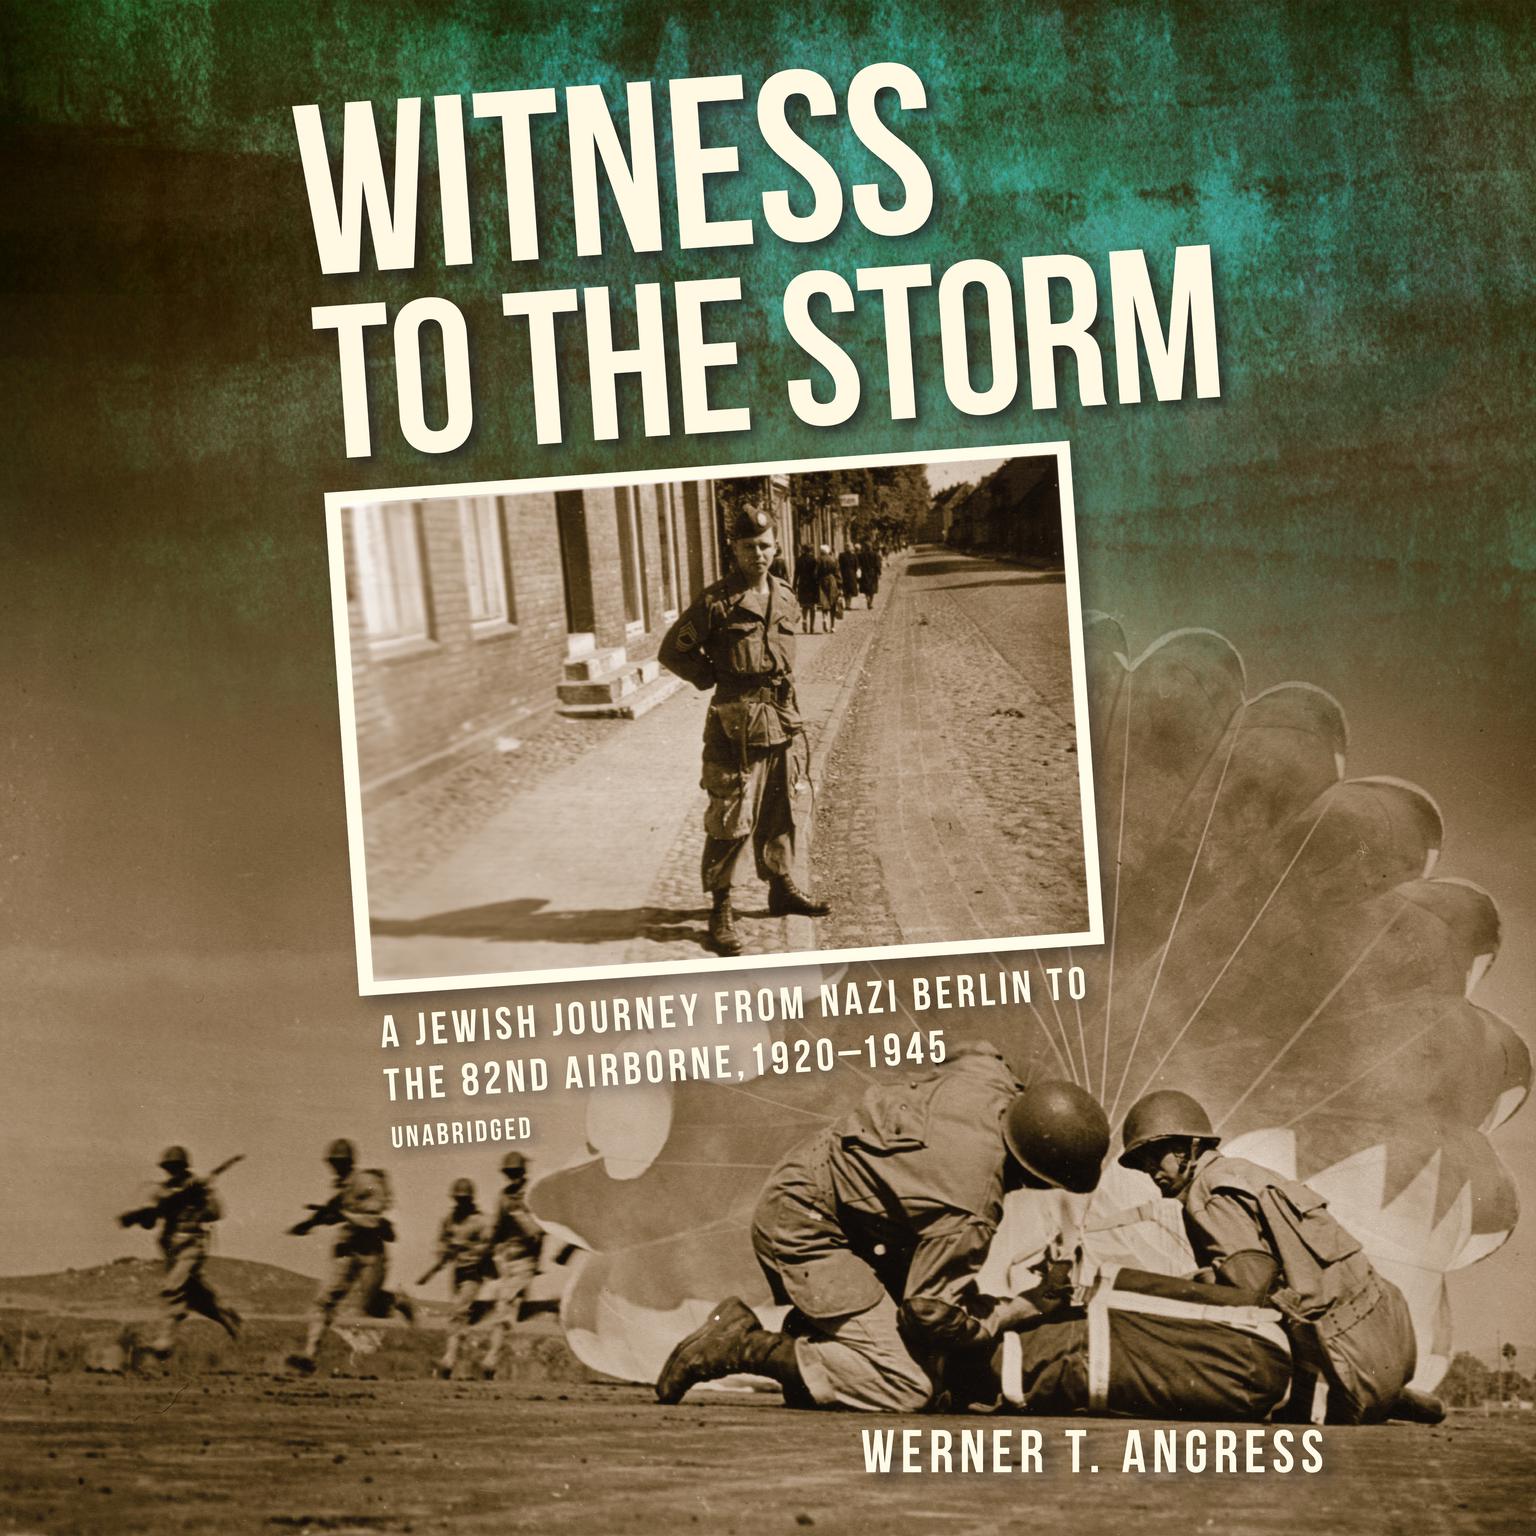 Witness to the Storm: A Jewish Journey from Nazi Berlin to the 82nd Airborne, 1920–1945 Audiobook, by Werner T. Angress